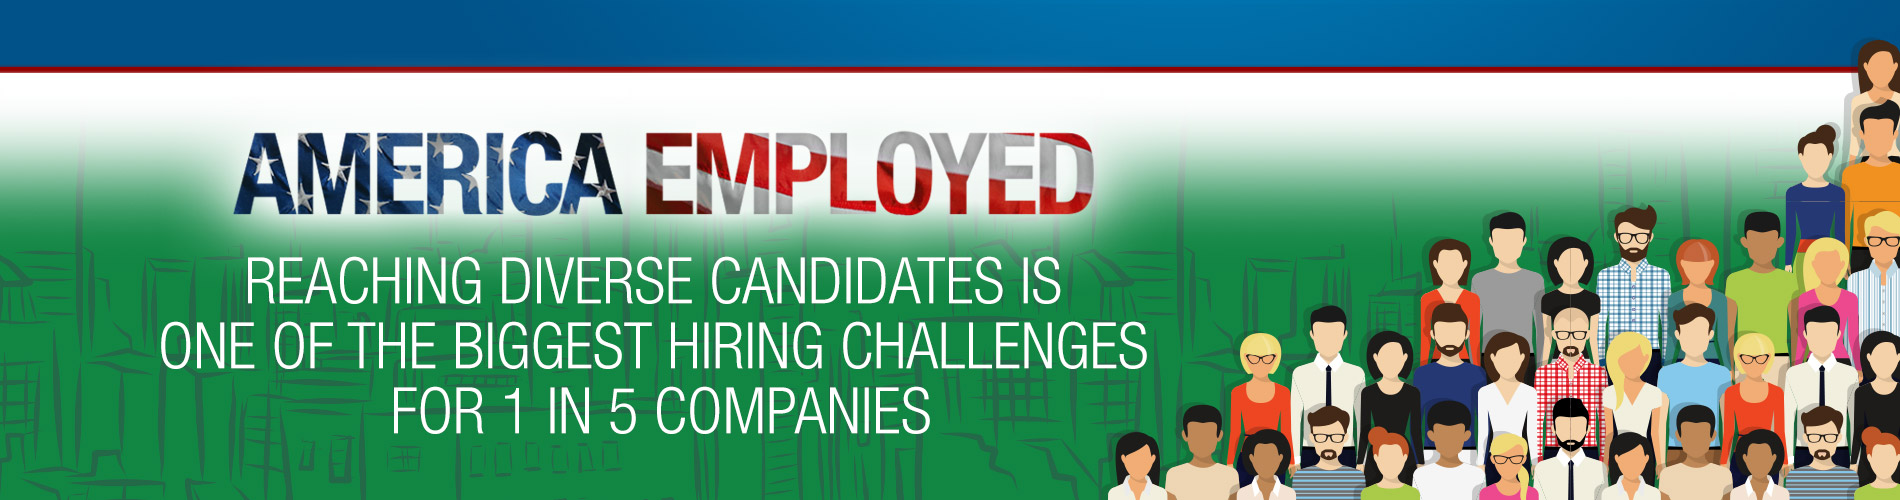 06-8-2022-Company-Diversity-Policies-Banner-AE